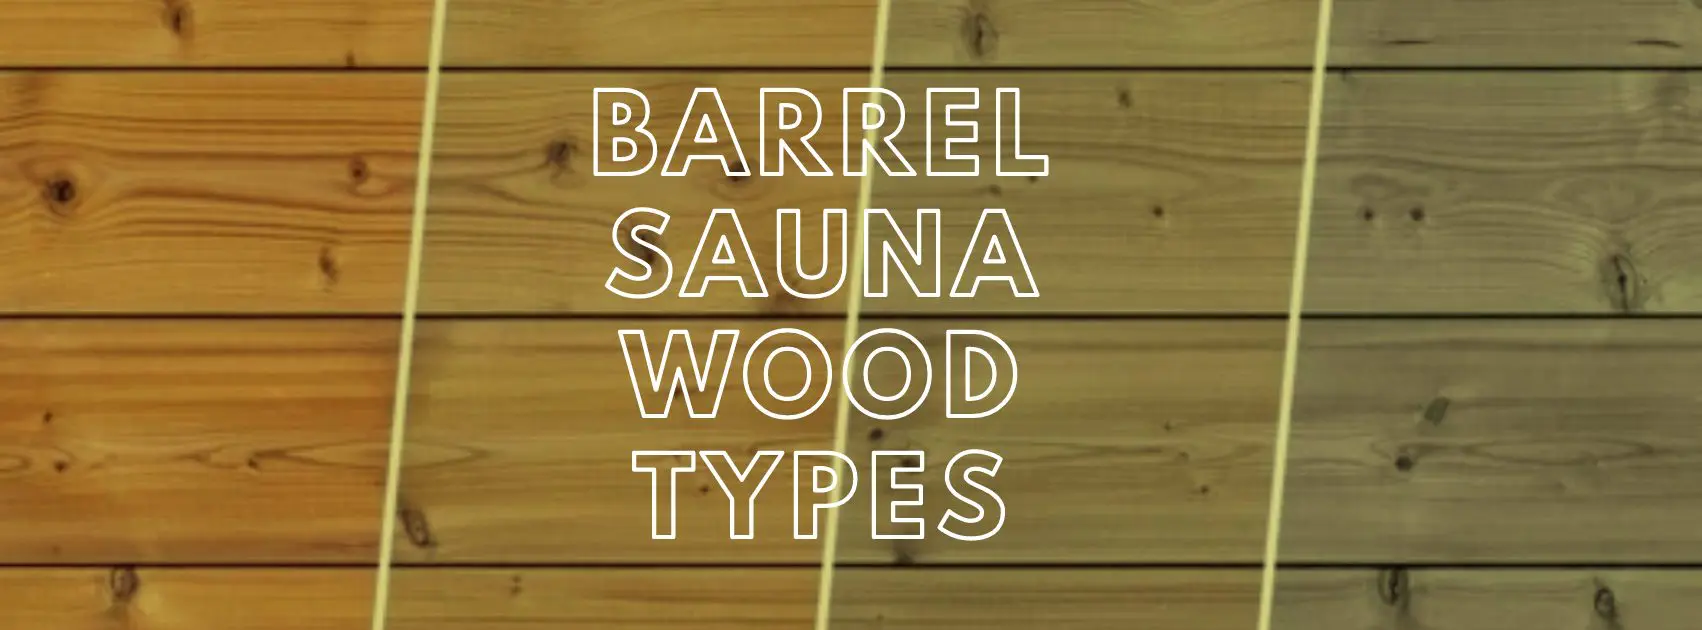 Cedar, Pine, or Thermally Modified Nordic Spruce: The Ultimate Barrel Sauna Wood Types Showdown